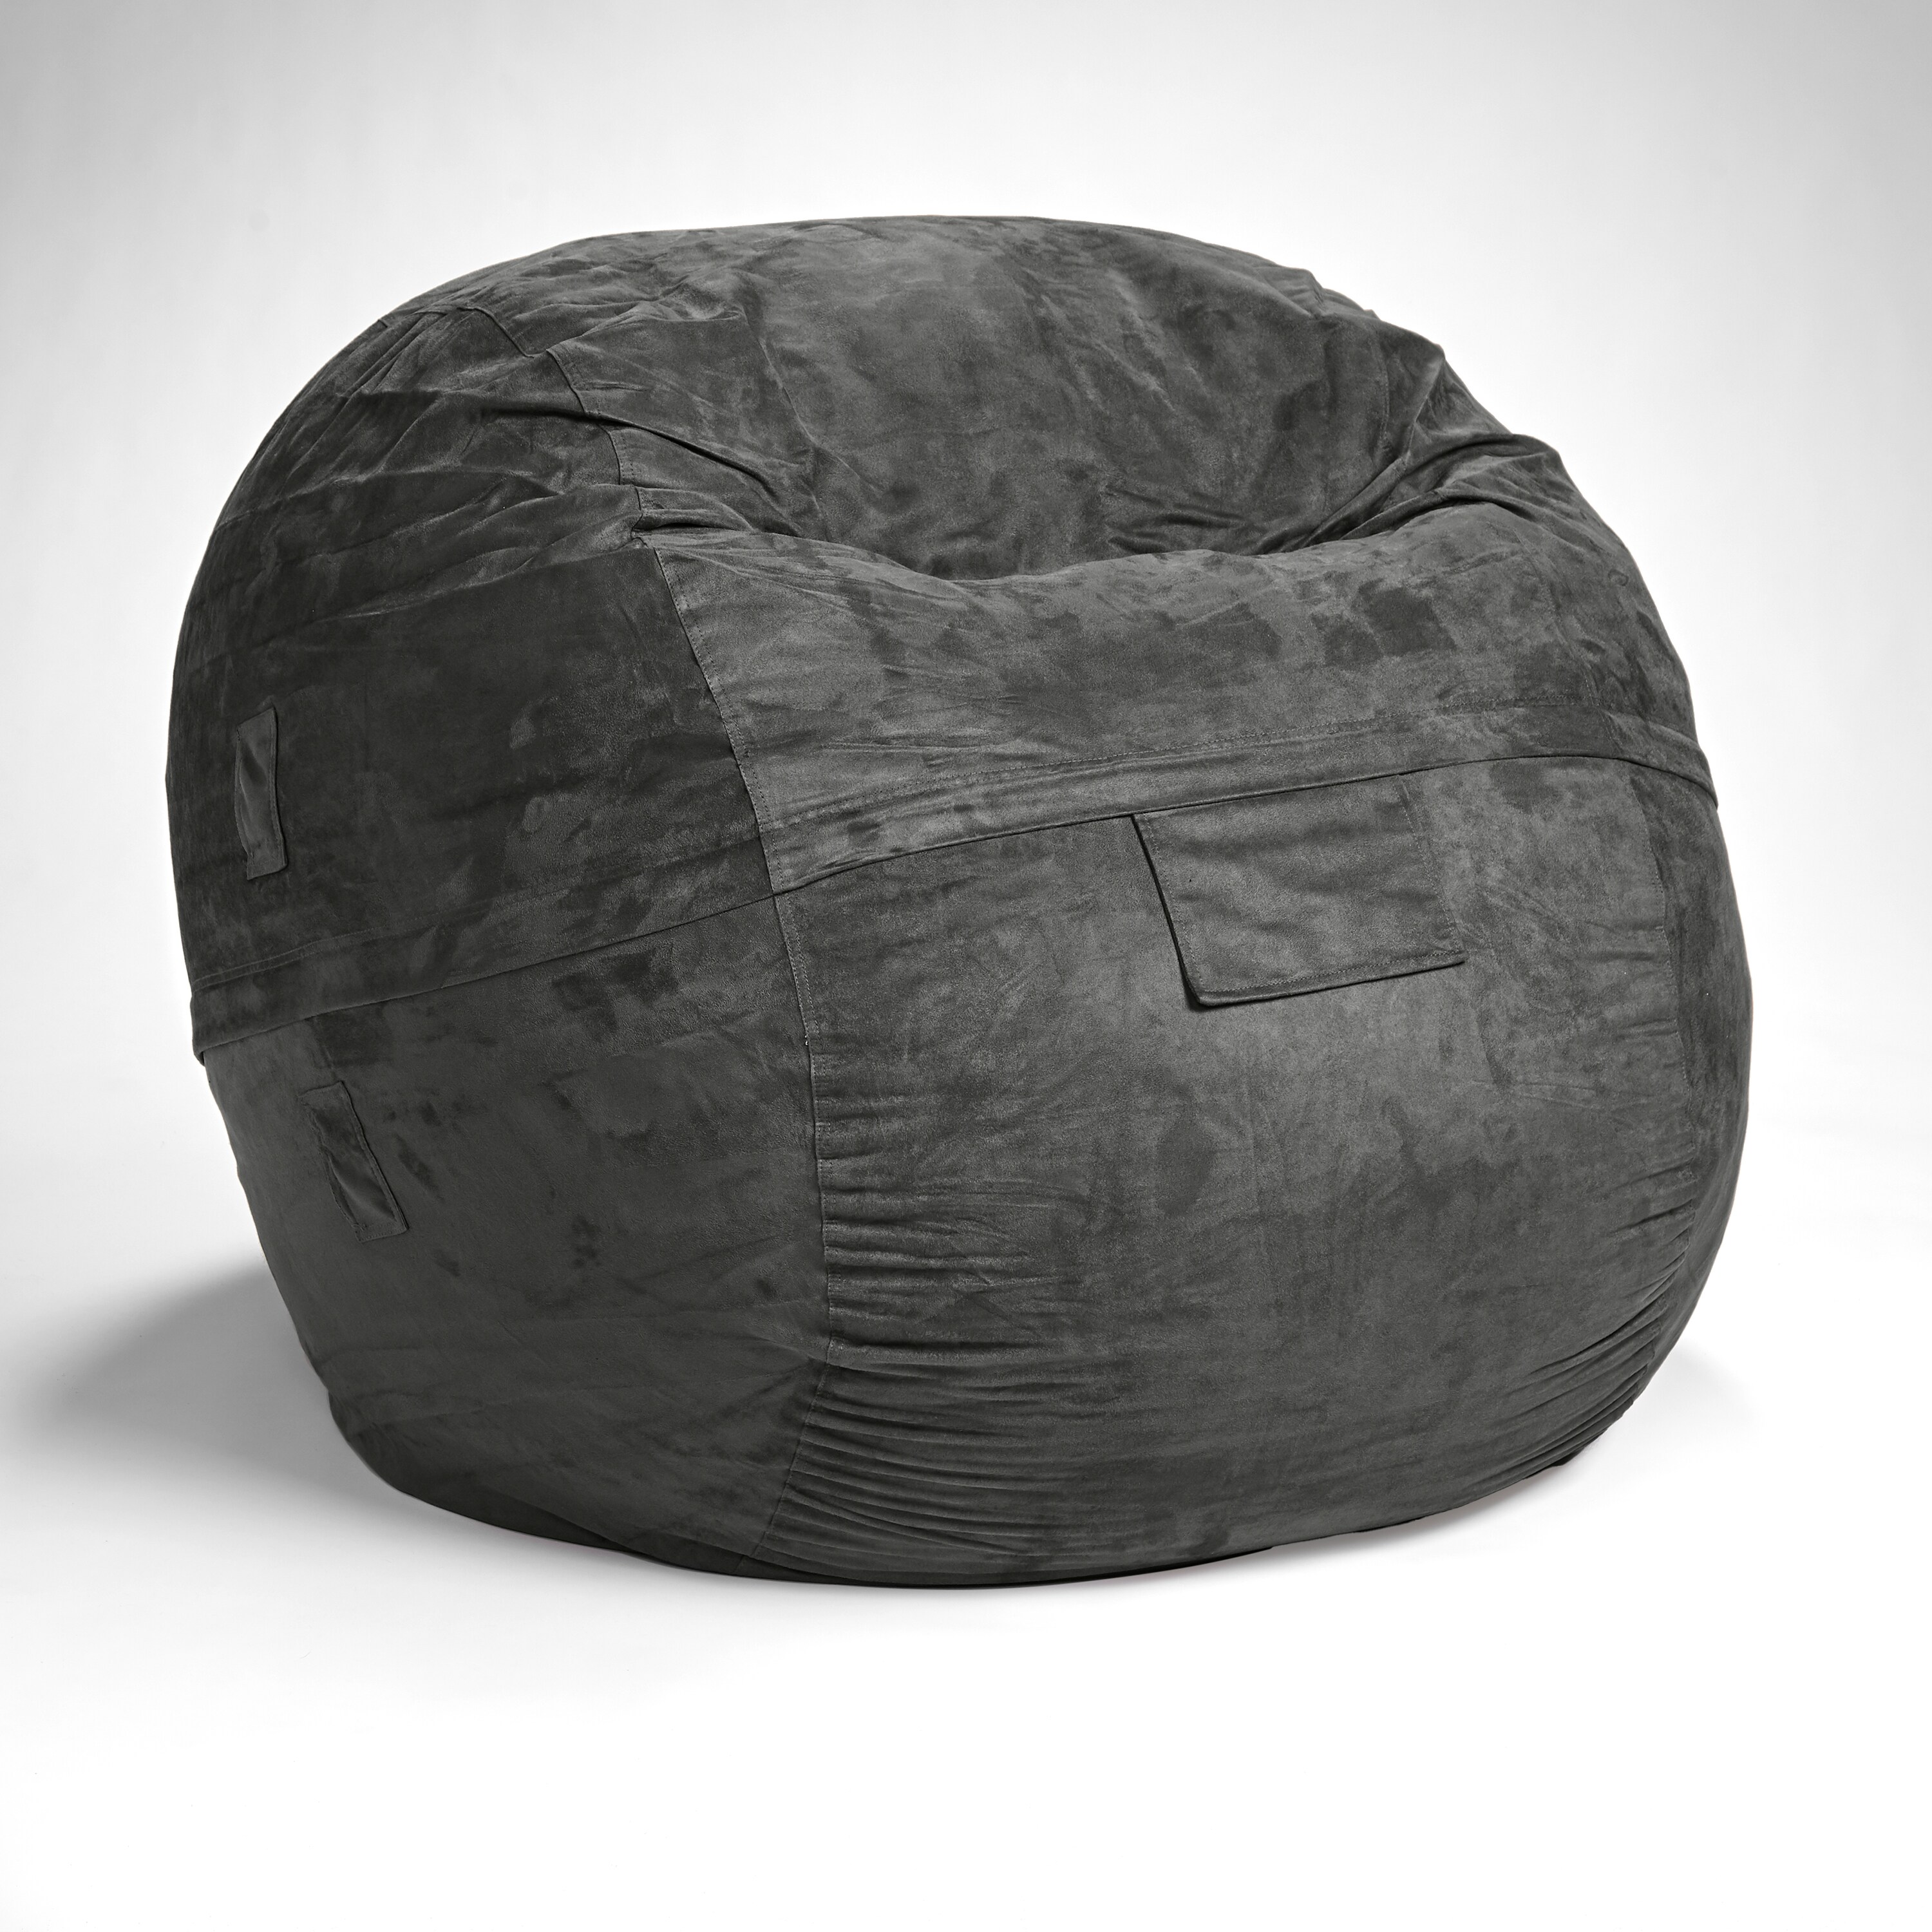 Bean Bag Chairs Recalled After Two Children Die